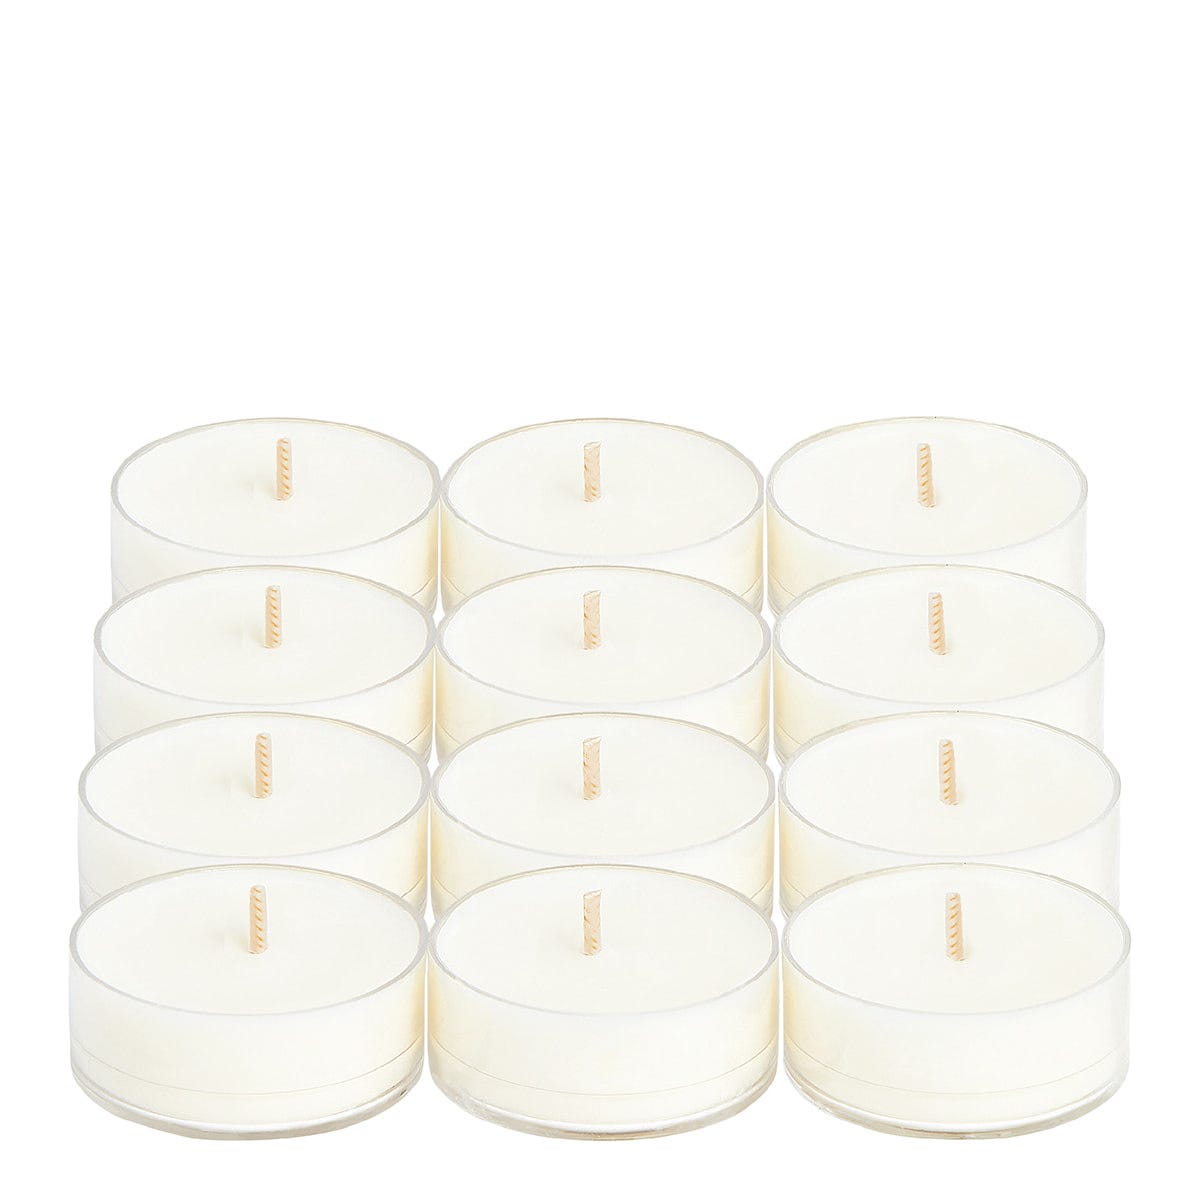 Be Peaceful Geranium + Pine 100% Soy Tealight Candles - PartyLite US